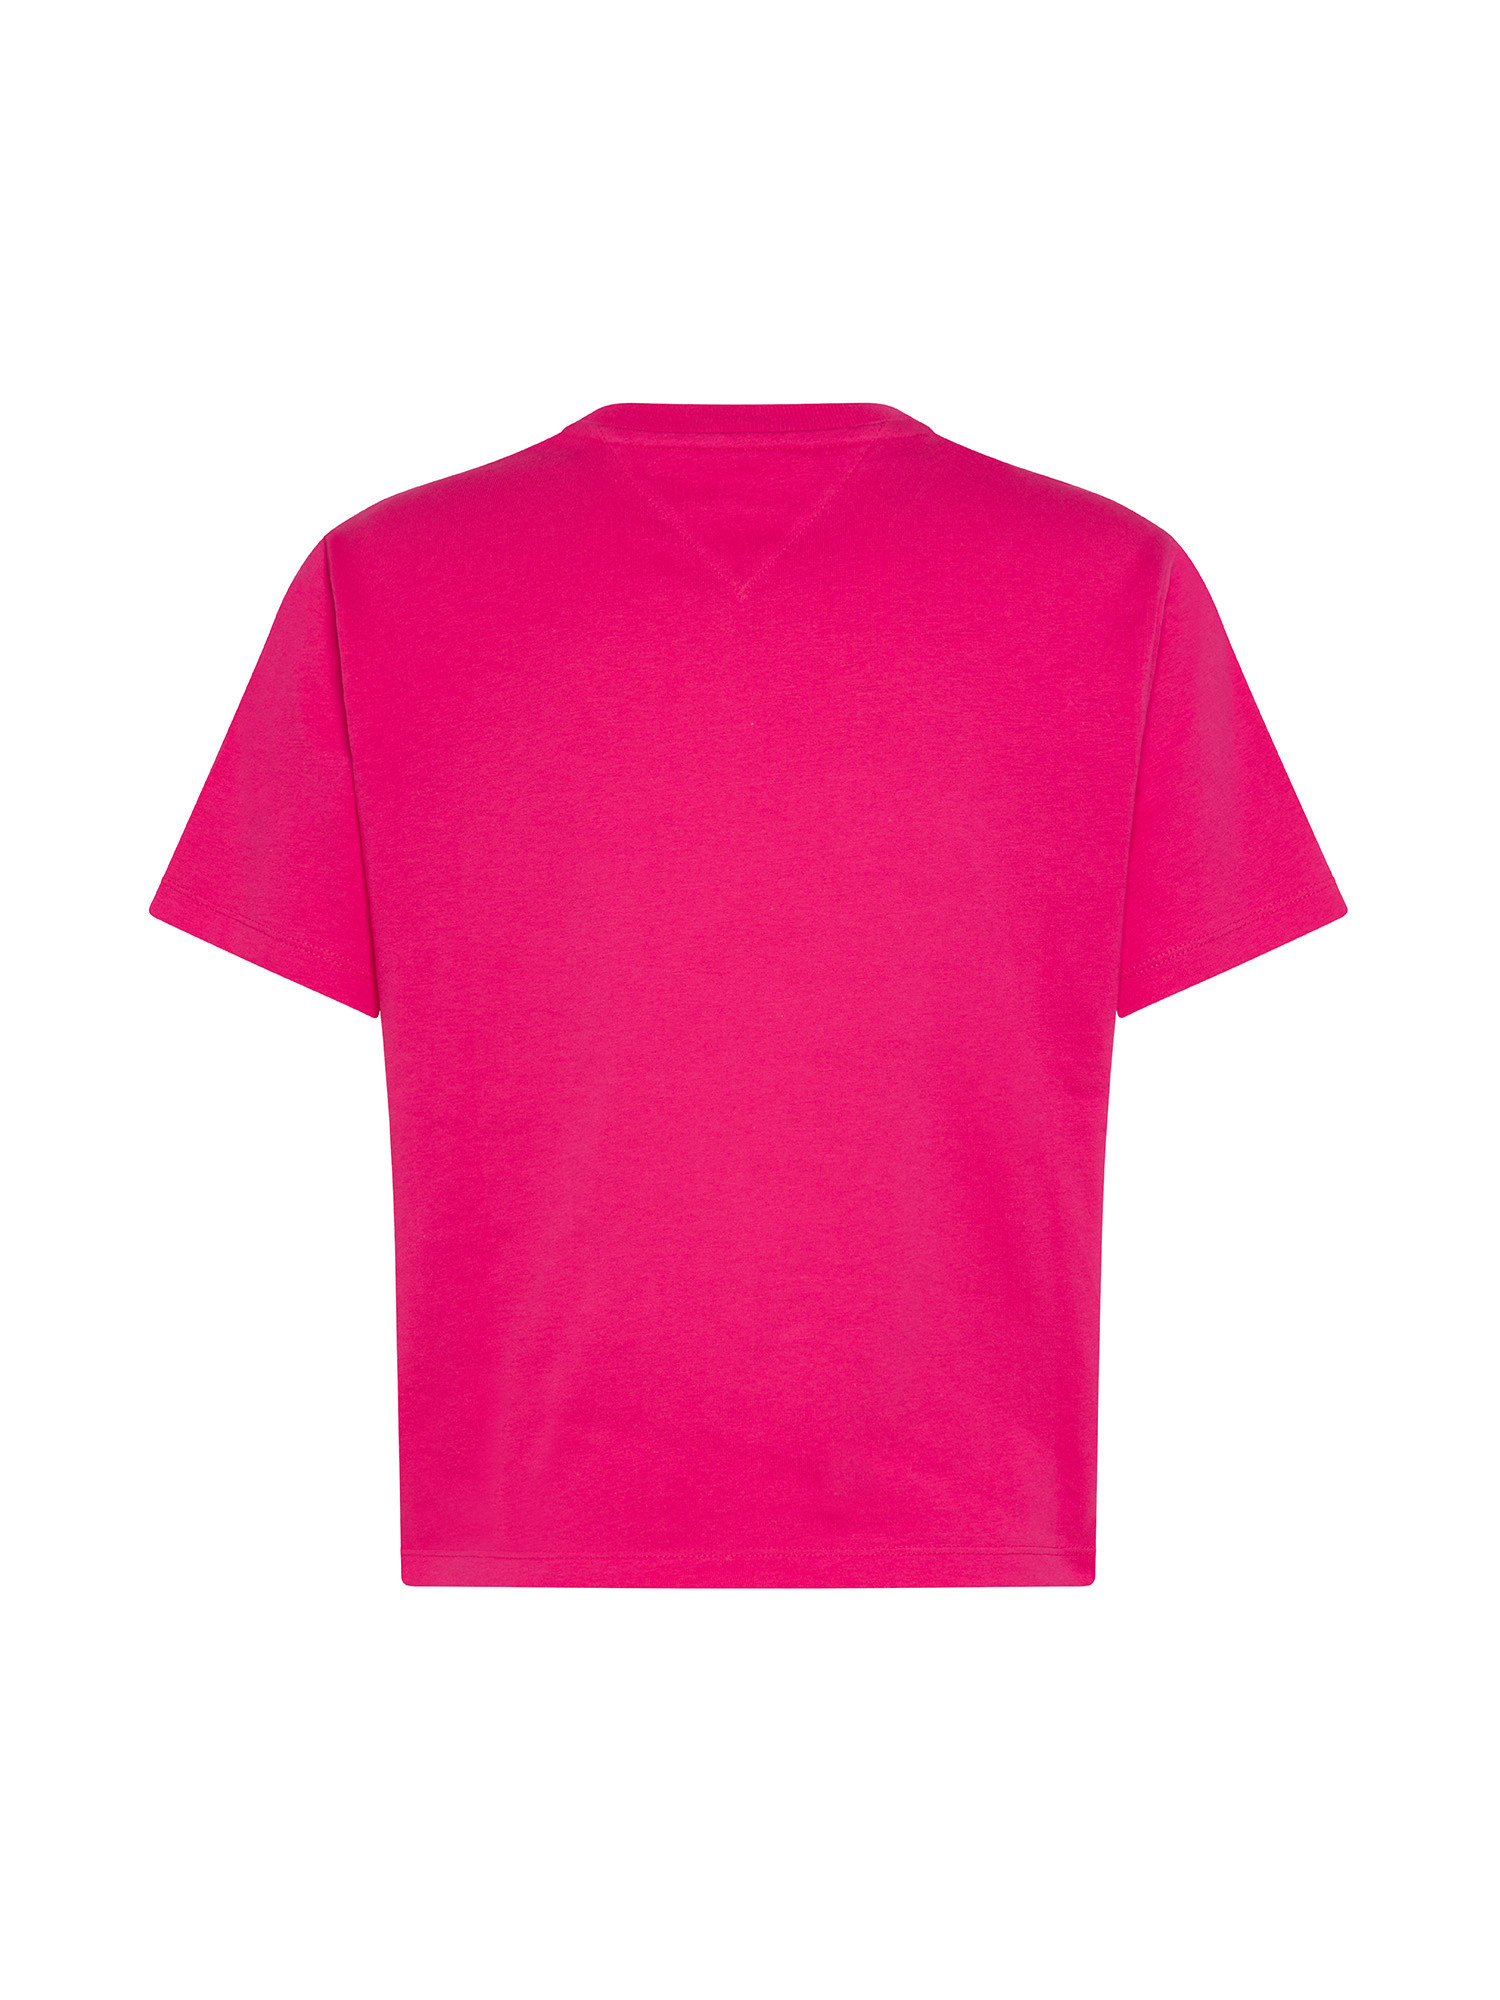 Tommy Jeans - T-shirt con logo ricamato in cotone, Rosa fuxia, large image number 1